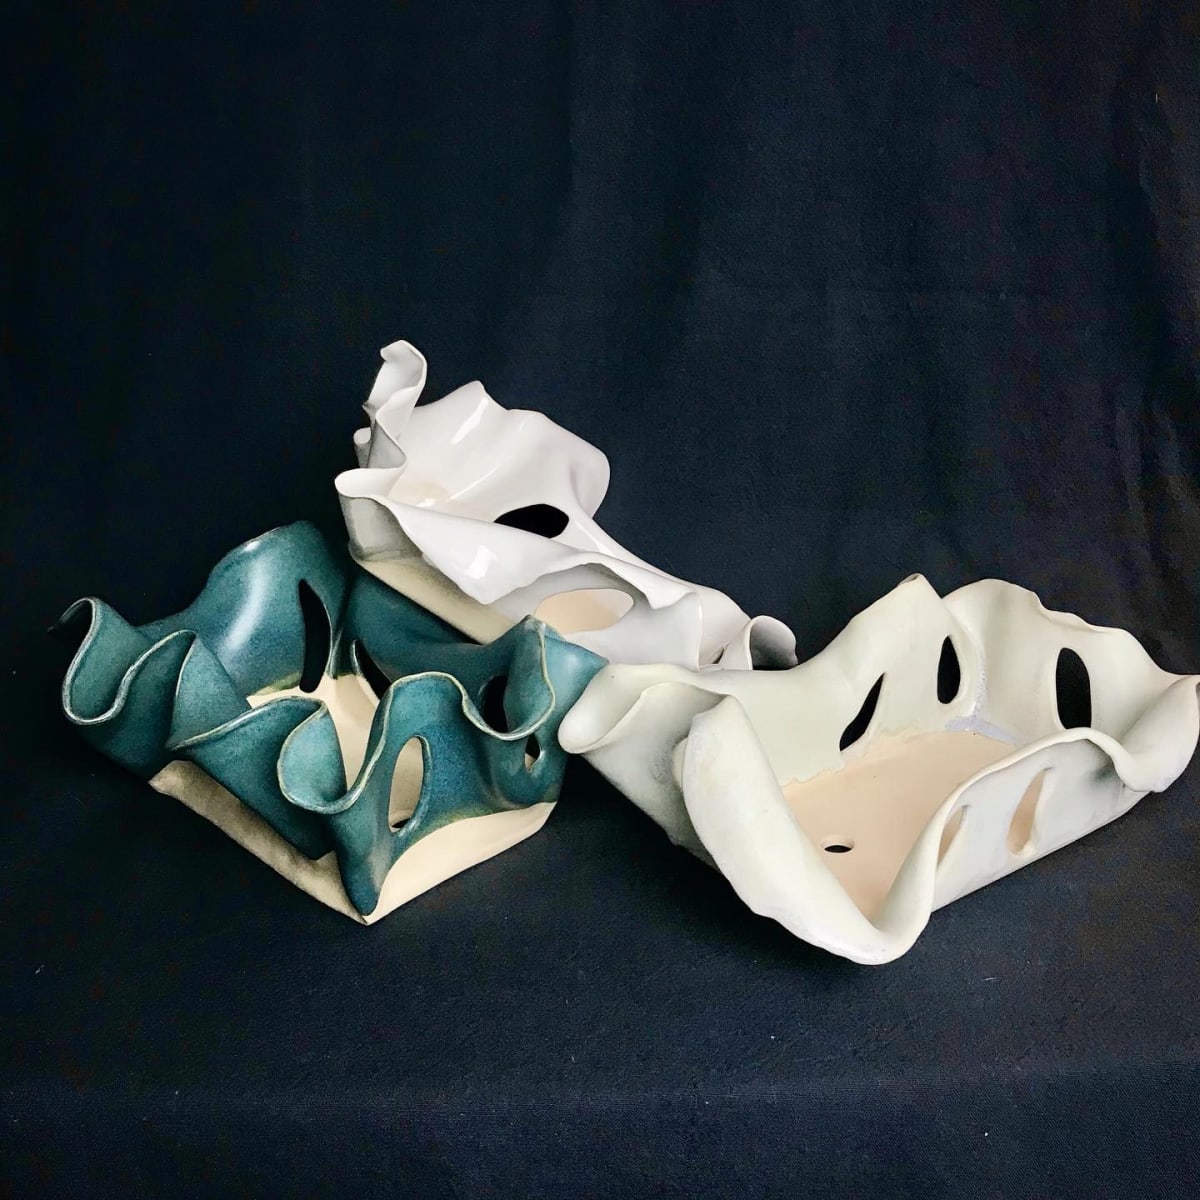 Orchid Vessels (medium) by Tamara Rafkin  Image: Various colors and slight difference on sizes, these are the medium orchid vessels and are also available to be commissioned in various glaze colors.